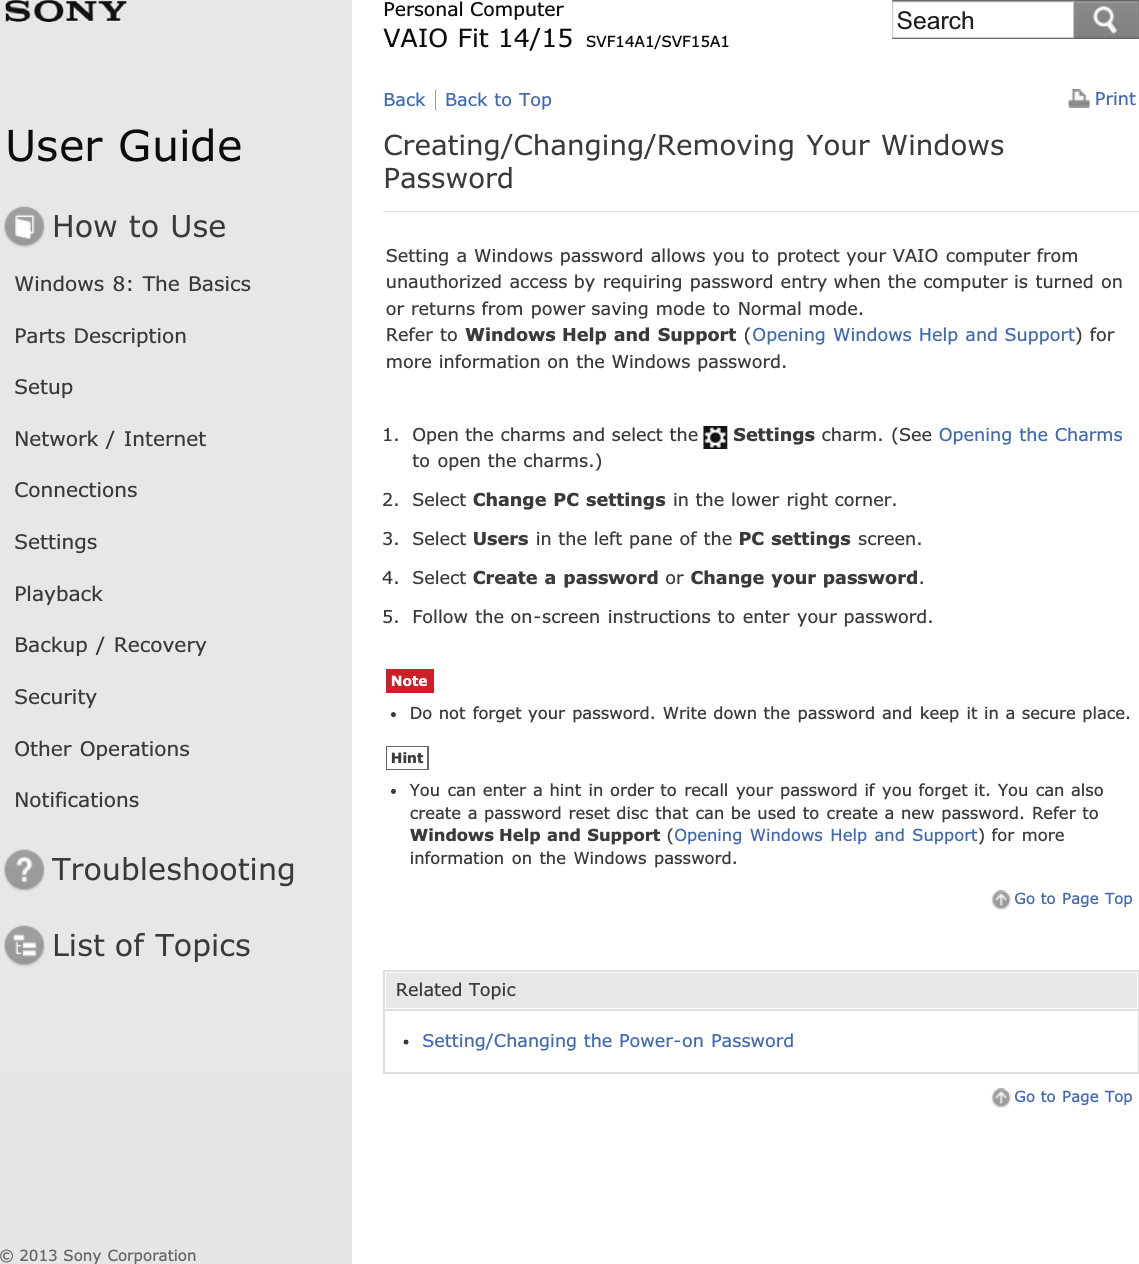 User GuideHow to UseWindows 8: The BasicsParts DescriptionSetupNetwork / InternetConnectionsSettingsPlaybackBackup / RecoverySecurityOther OperationsNotificationsTroubleshootingList of TopicsPrintPersonal ComputerVAIO Fit 14/15 SVF14A1/SVF15A1Creating/Changing/Removing Your WindowsPasswordSetting a Windows password allows you to protect your VAIO computer fromunauthorized access by requiring password entry when the computer is turned onor returns from power saving mode to Normal mode.Refer to Windows Help and Support (Opening Windows Help and Support) formore information on the Windows password.1. Open the charms and select the Settings charm. (See Opening the Charmsto open the charms.)2. Select Change PC settings in the lower right corner.3. Select Users in the left pane of the PC settings screen.4. Select Create a password or Change your password.5. Follow the on-screen instructions to enter your password.NoteDo not forget your password. Write down the password and keep it in a secure place.HintYou can enter a hint in order to recall your password if you forget it. You can alsocreate a password reset disc that can be used to create a new password. Refer toWindows Help and Support (Opening Windows Help and Support) for moreinformation on the Windows password.Go to Page TopRelated TopicSetting/Changing the Power-on PasswordGo to Page TopBack Back to Top© 2013 Sony CorporationSearch